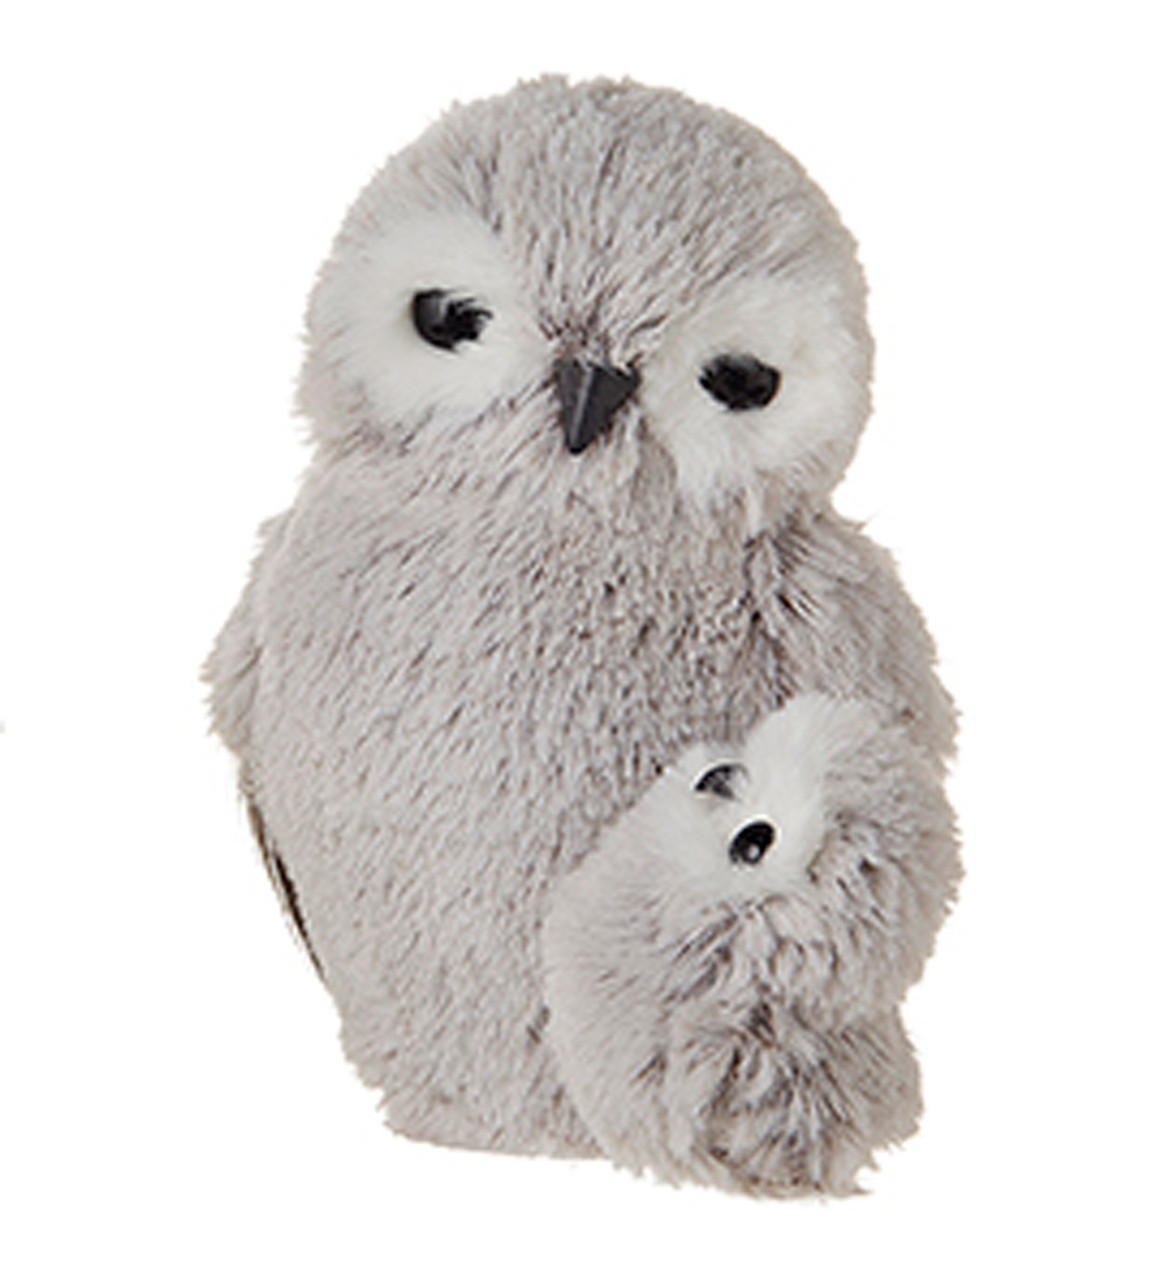 Fun White Fluff Round Baby Owl Ornament with Legs 3 3/4 your choice